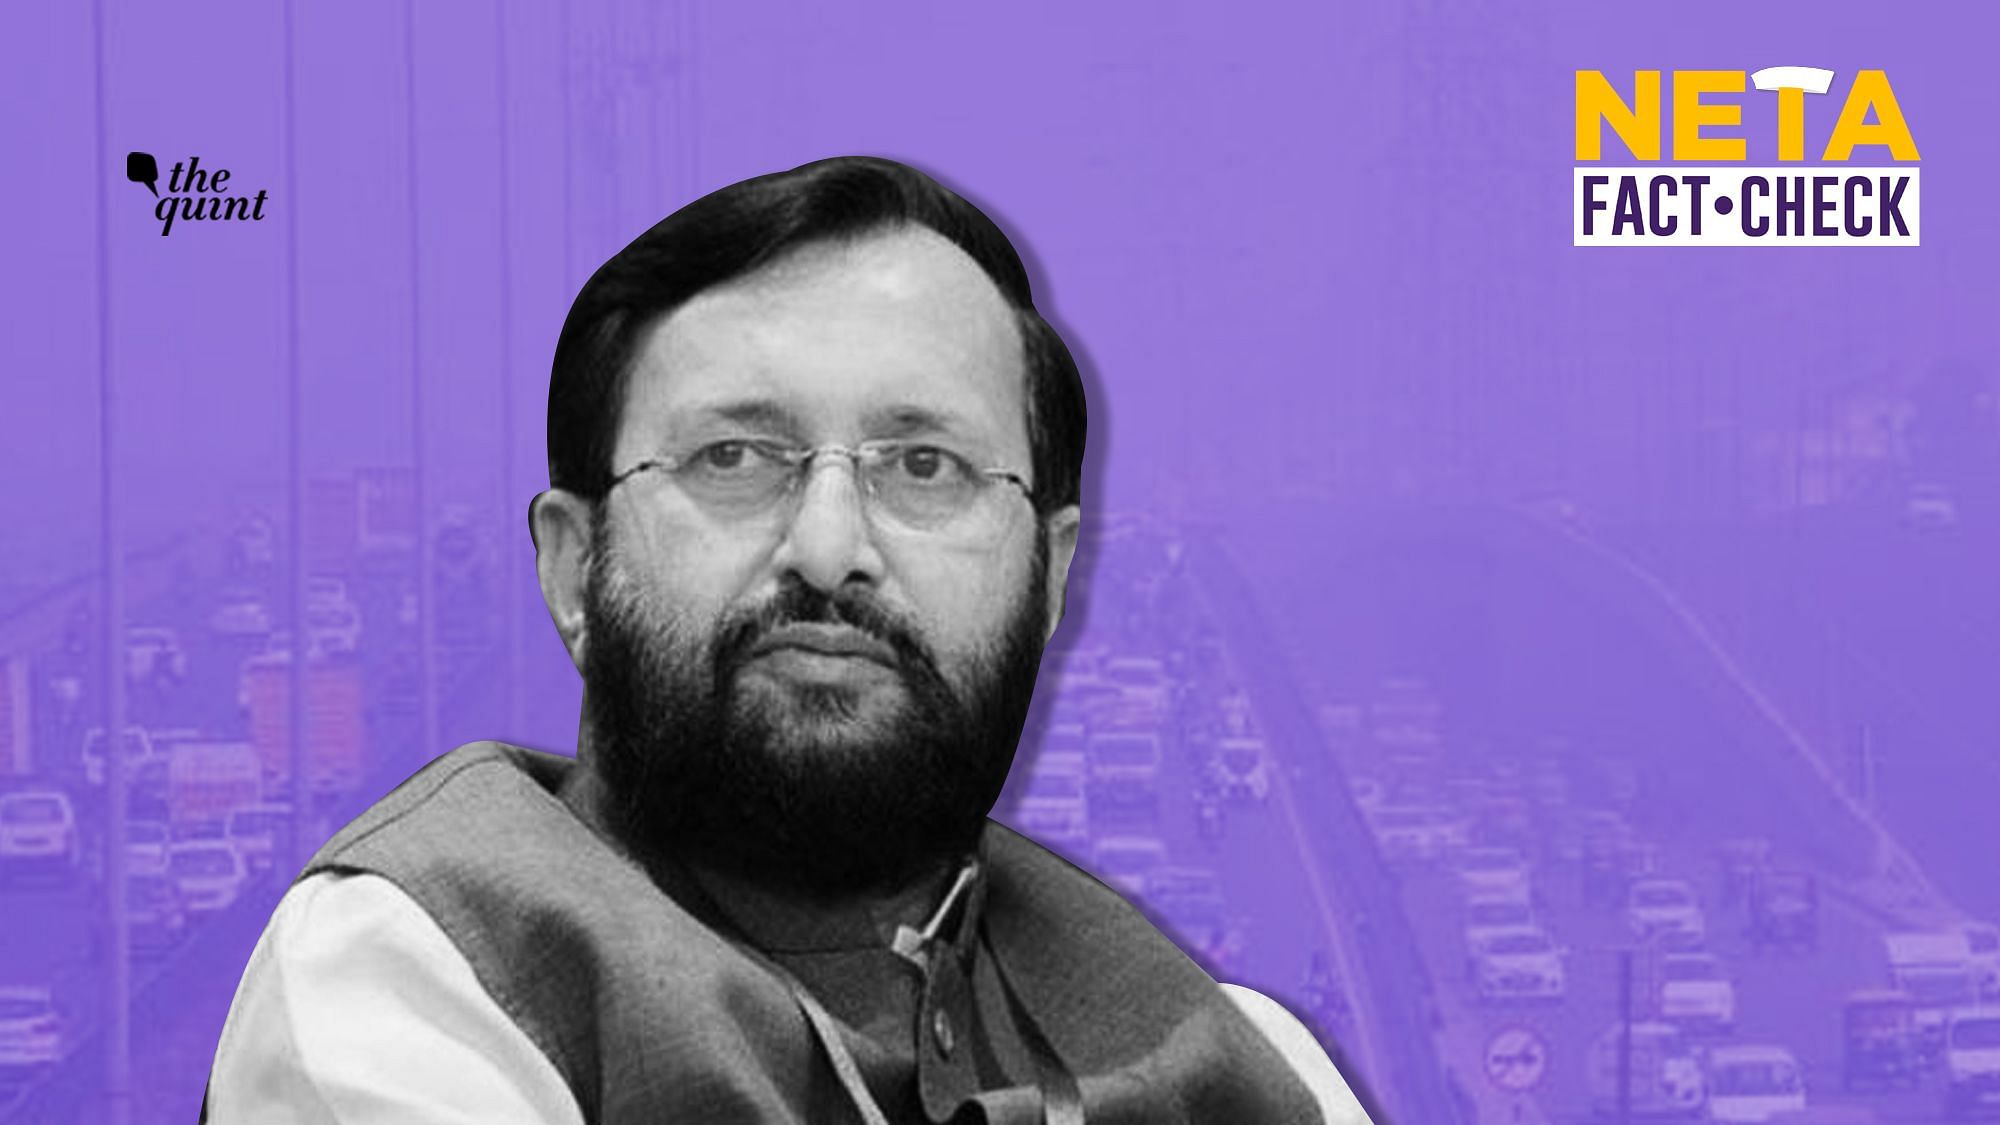 Speaking in the Lok Sabha, Union minister Prakash Javadekar said no Indian study has shown any correlation between pollution and shortening of lifespan.